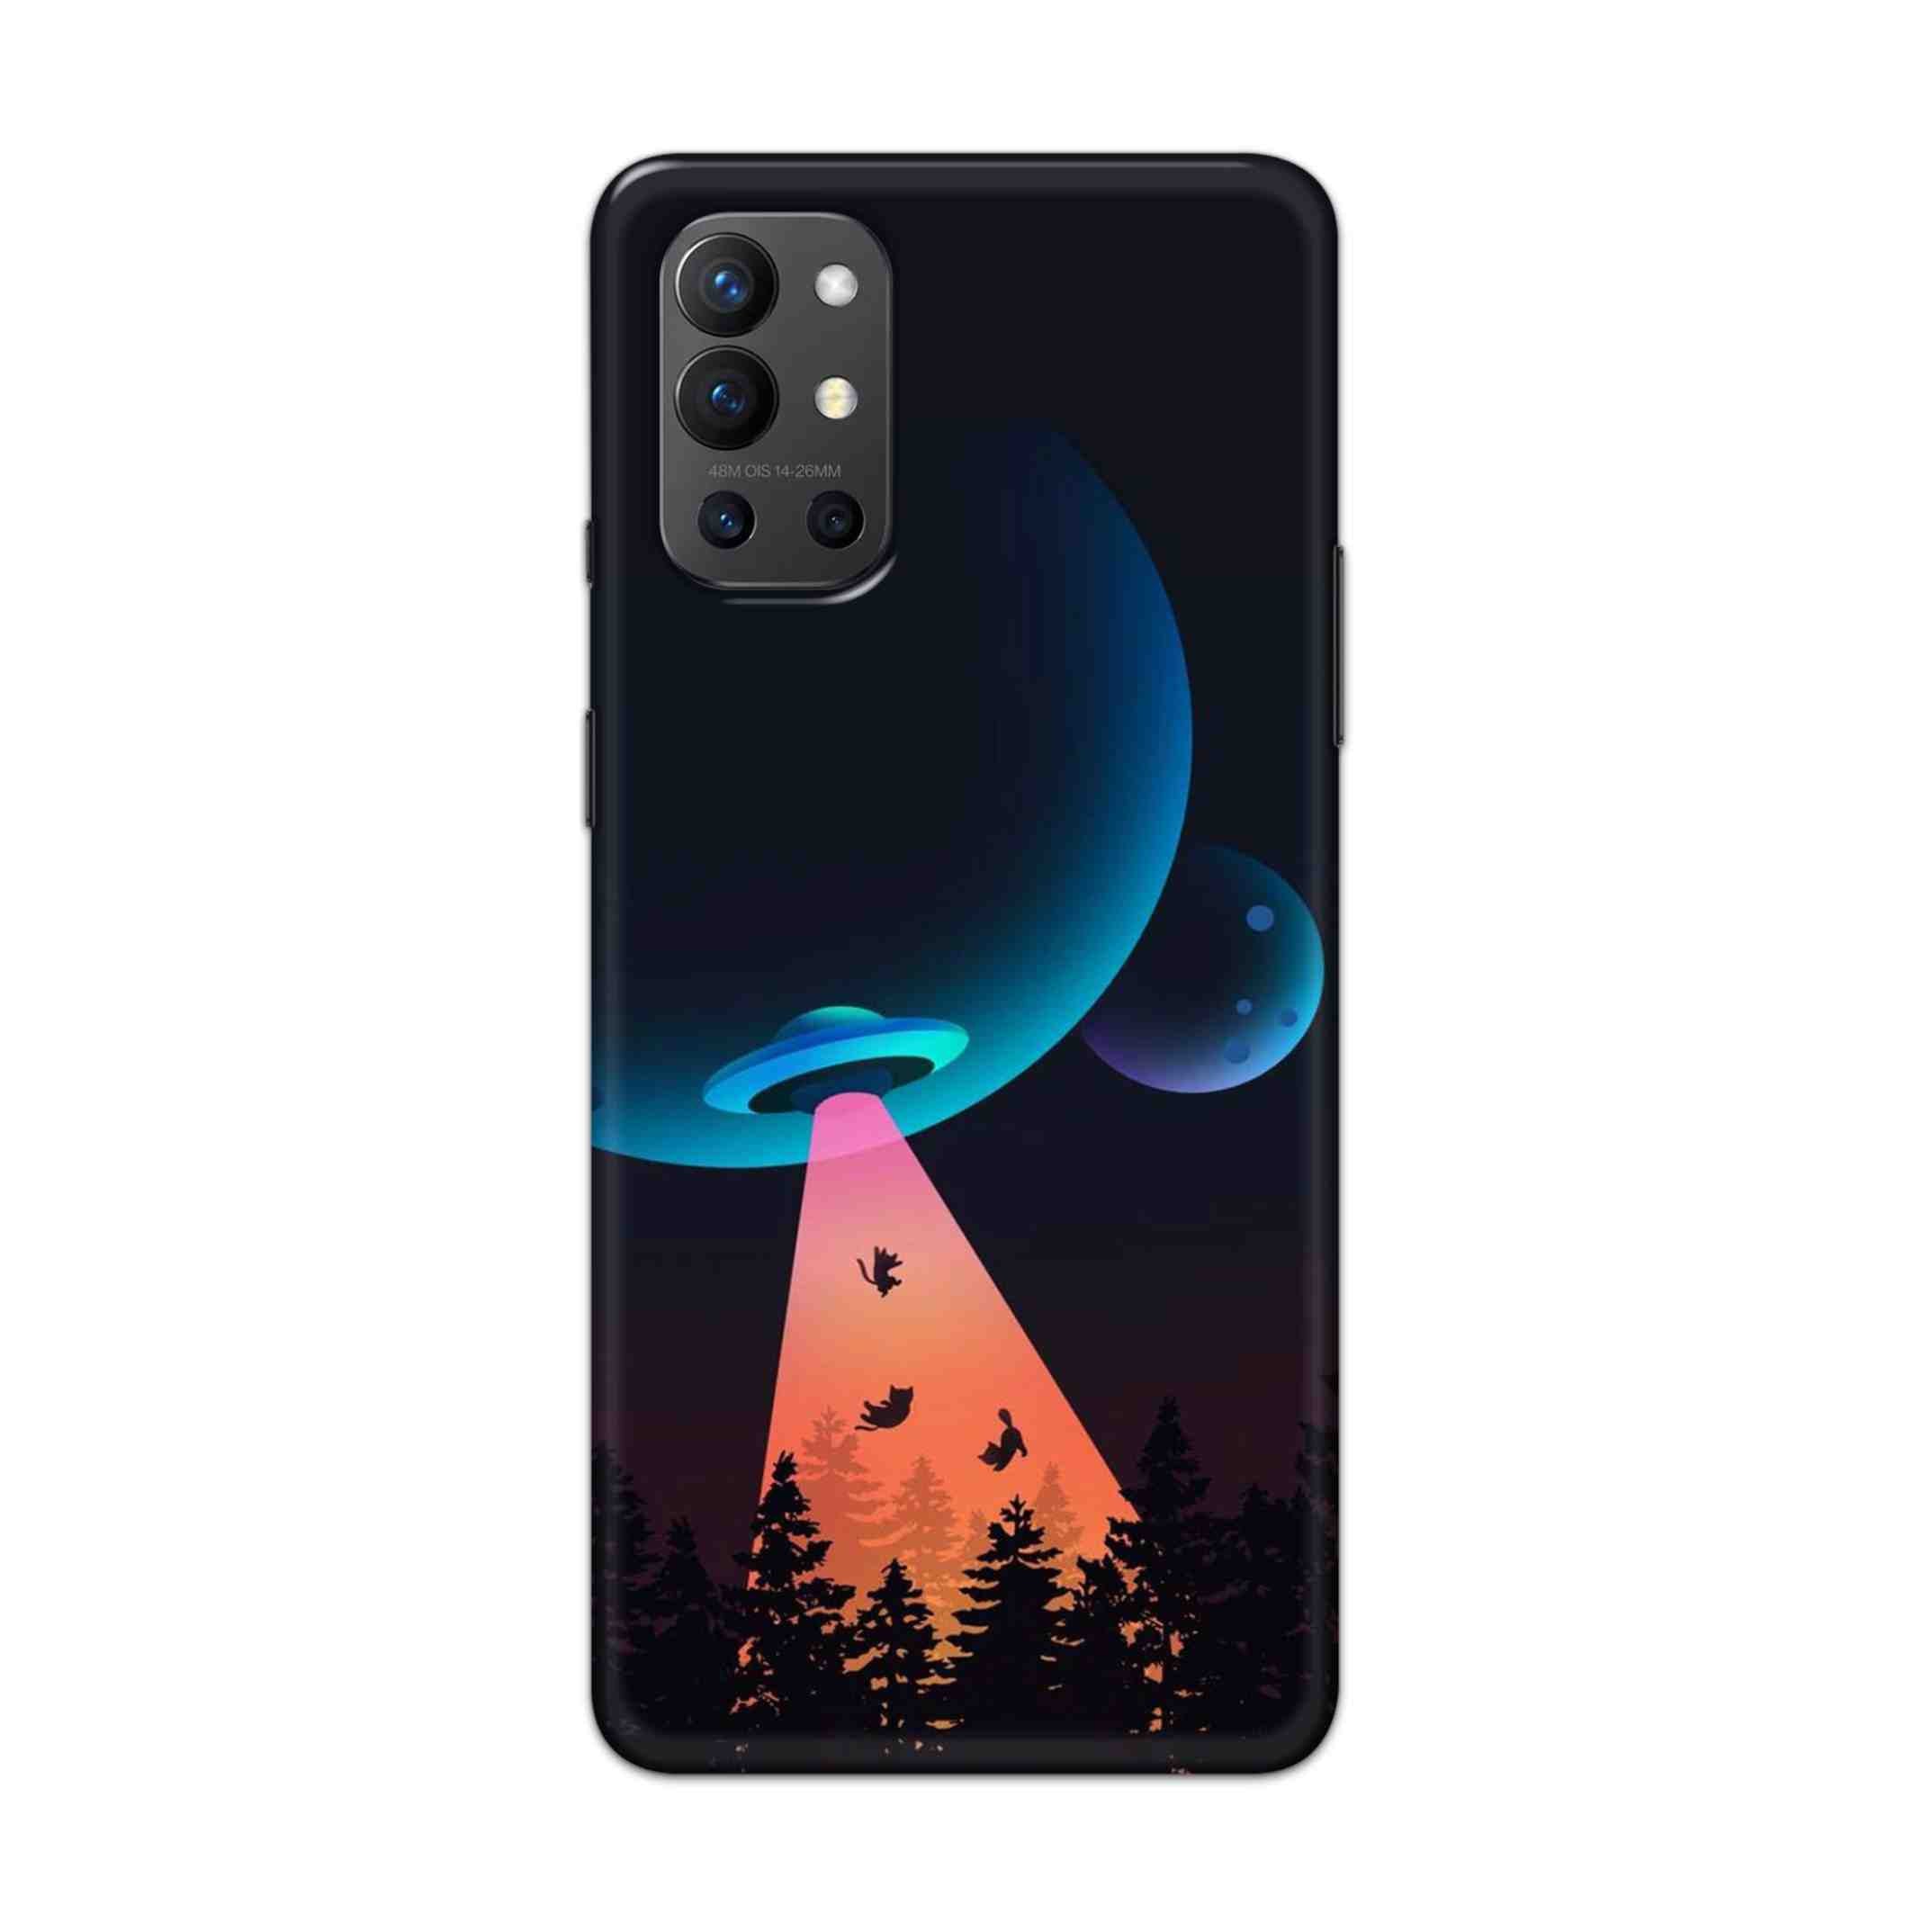 Buy Spaceship Hard Back Mobile Phone Case Cover For OnePlus 9R / 8T Online